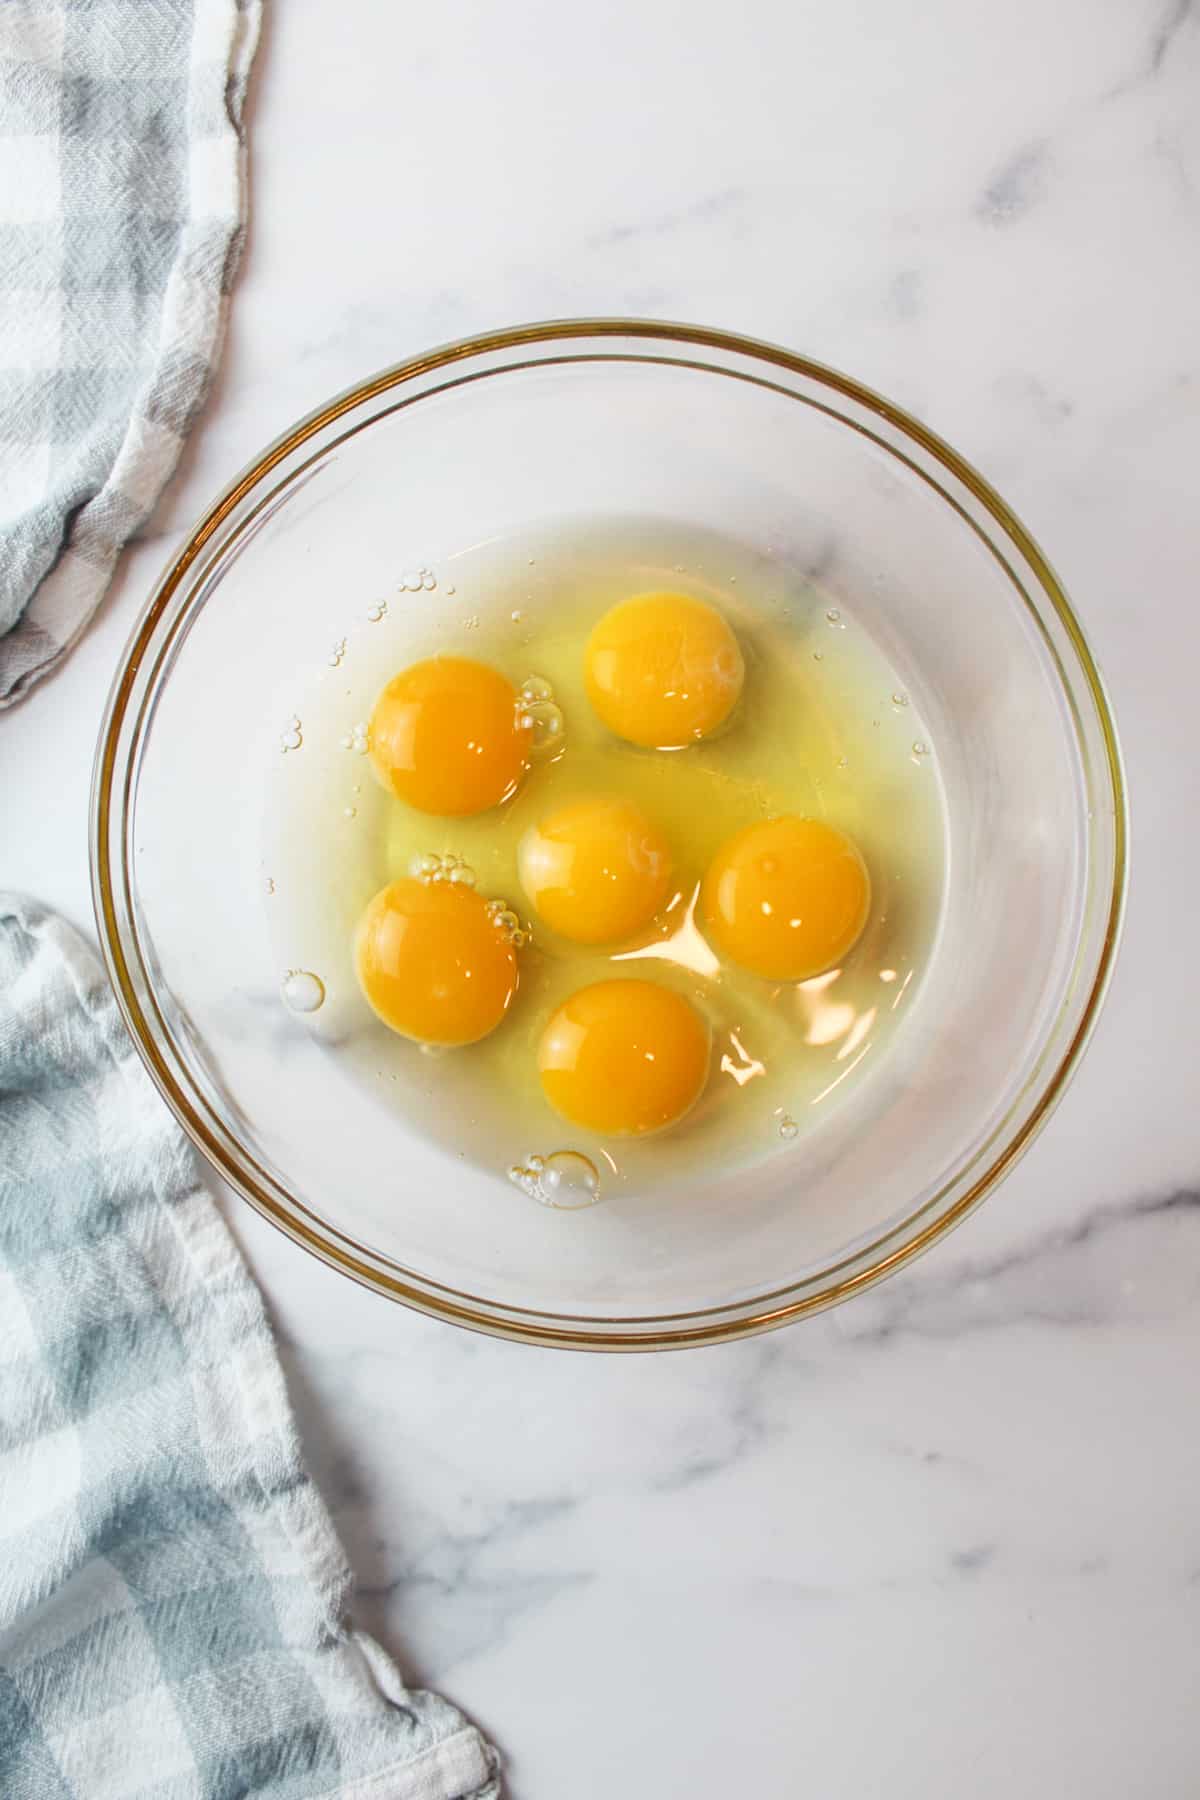 6 eggs in a mixing bowl